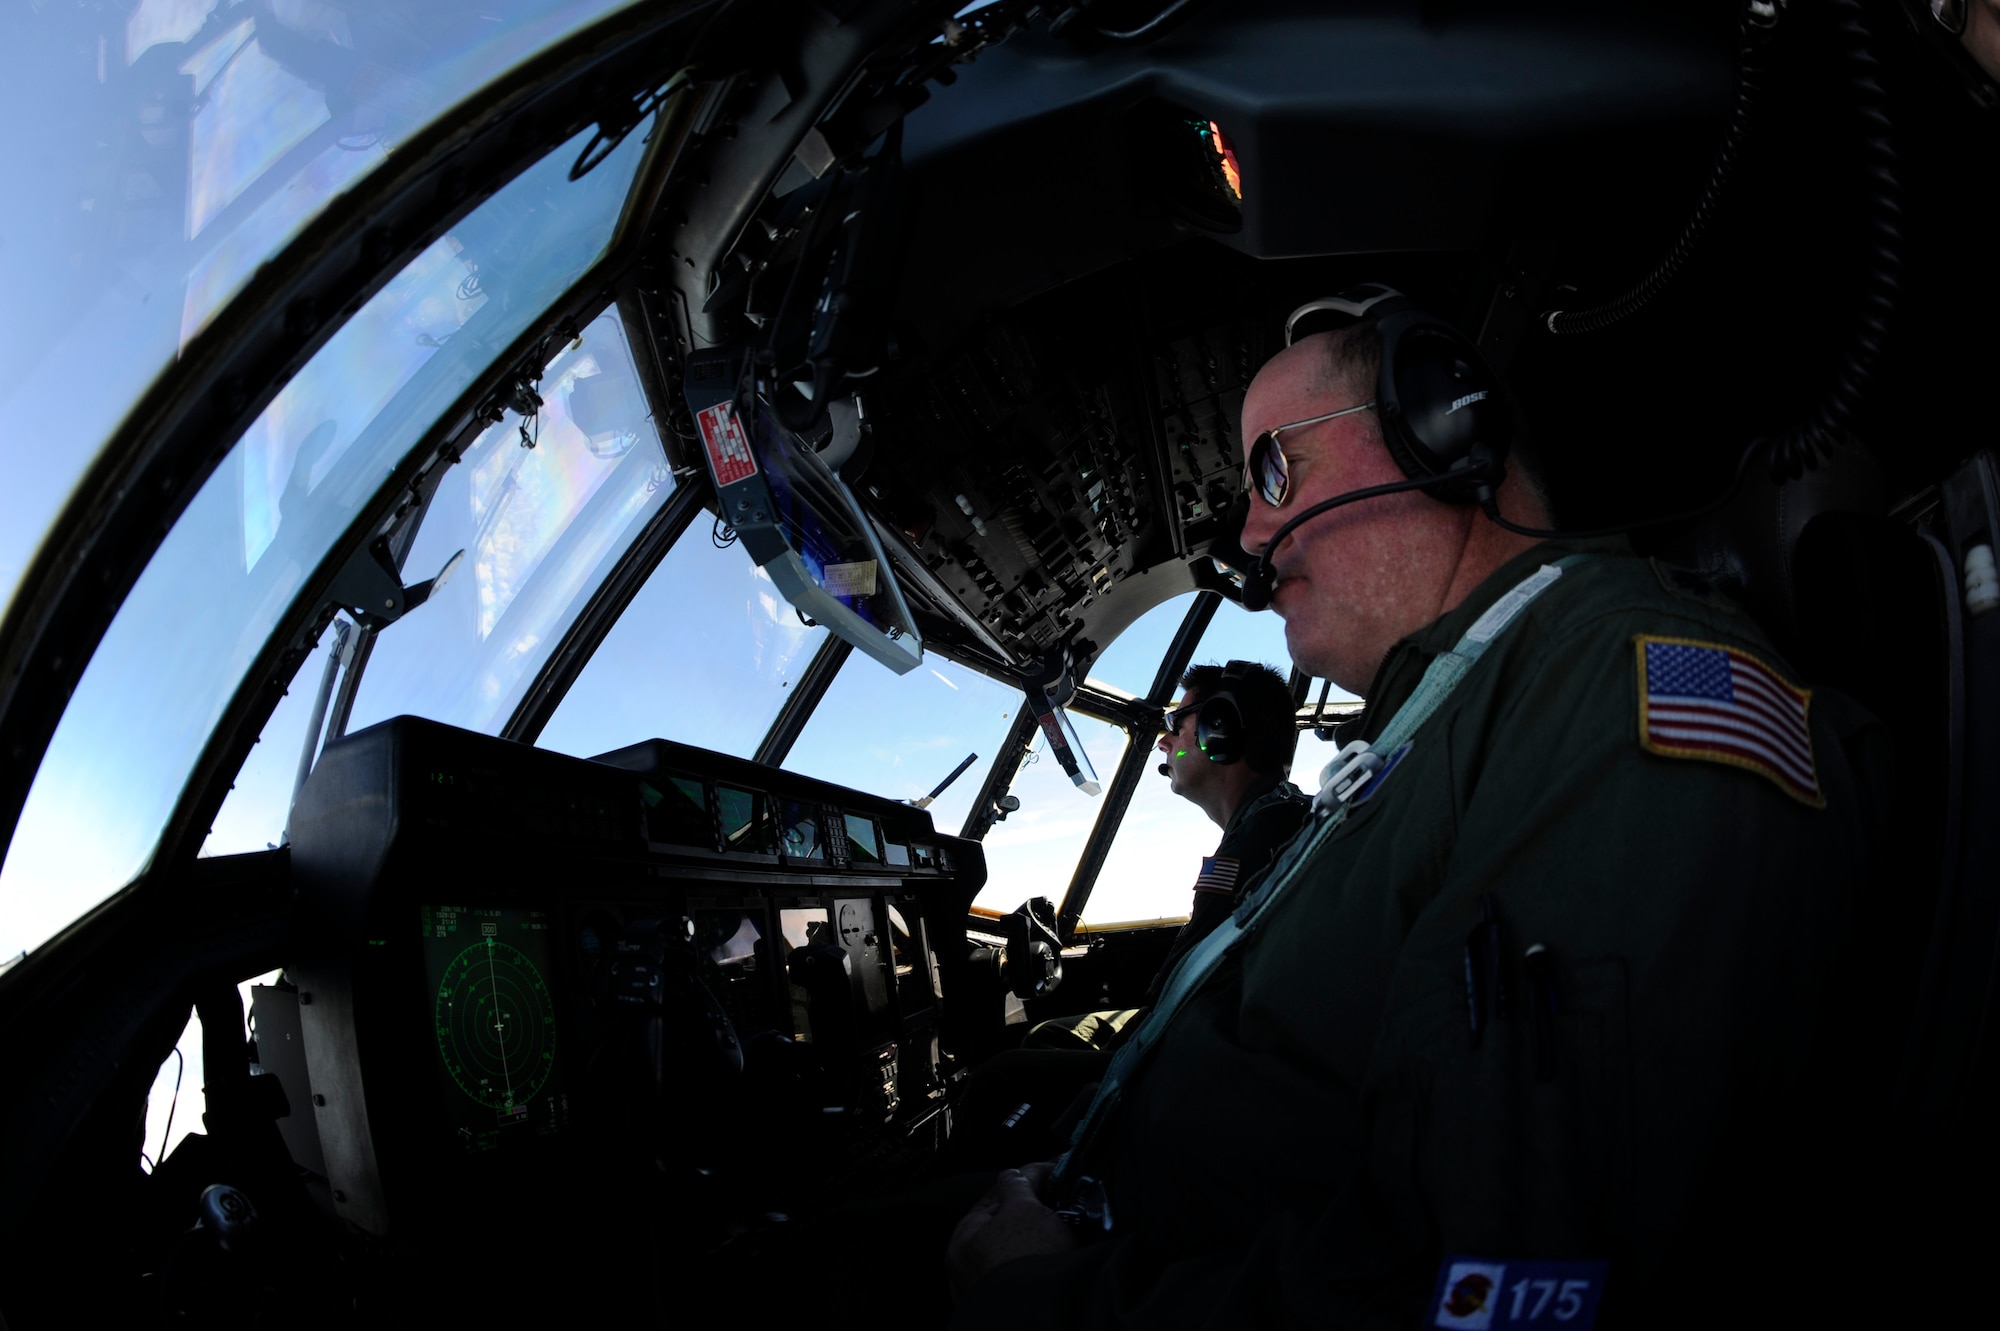 Lt. Col. Roger Gardner and Maj. Scot Salminen fly a  Hurricane Hunter WC-130J Hercules during a training mission June 7 to Homestead Air Reserve Base, Fla., from St. Croix, V.I.  Colonel Gardner is the aircraft commander and Major Salminen is chief of training for the 403rd Operations Support Squadron. The training mission covered the Air Force Reserve Command's weather reconnaissance mission as they enter hurricane season, which began June 1. (U.S. Air Force photo/Staff Sgt. Desiree N. Palacios)